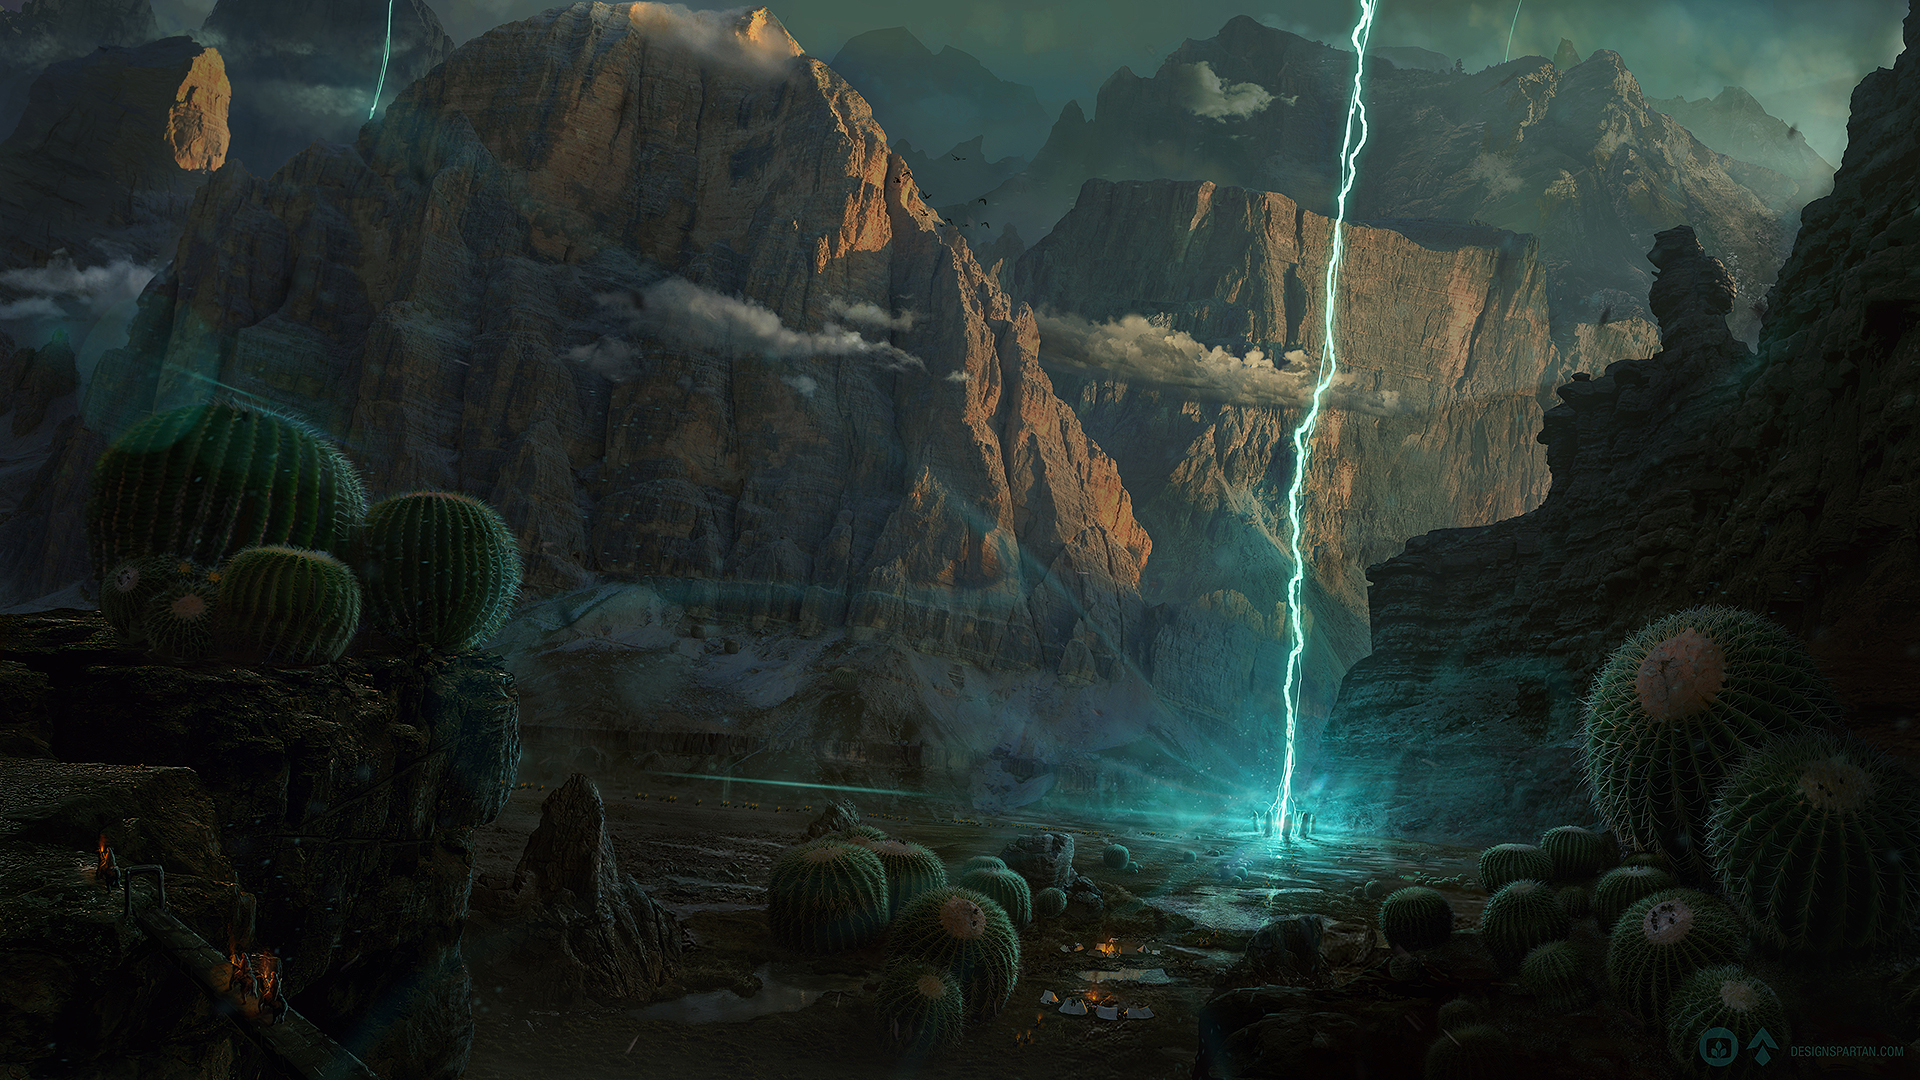 Desktopography 2013 : March of the Druids matte painting